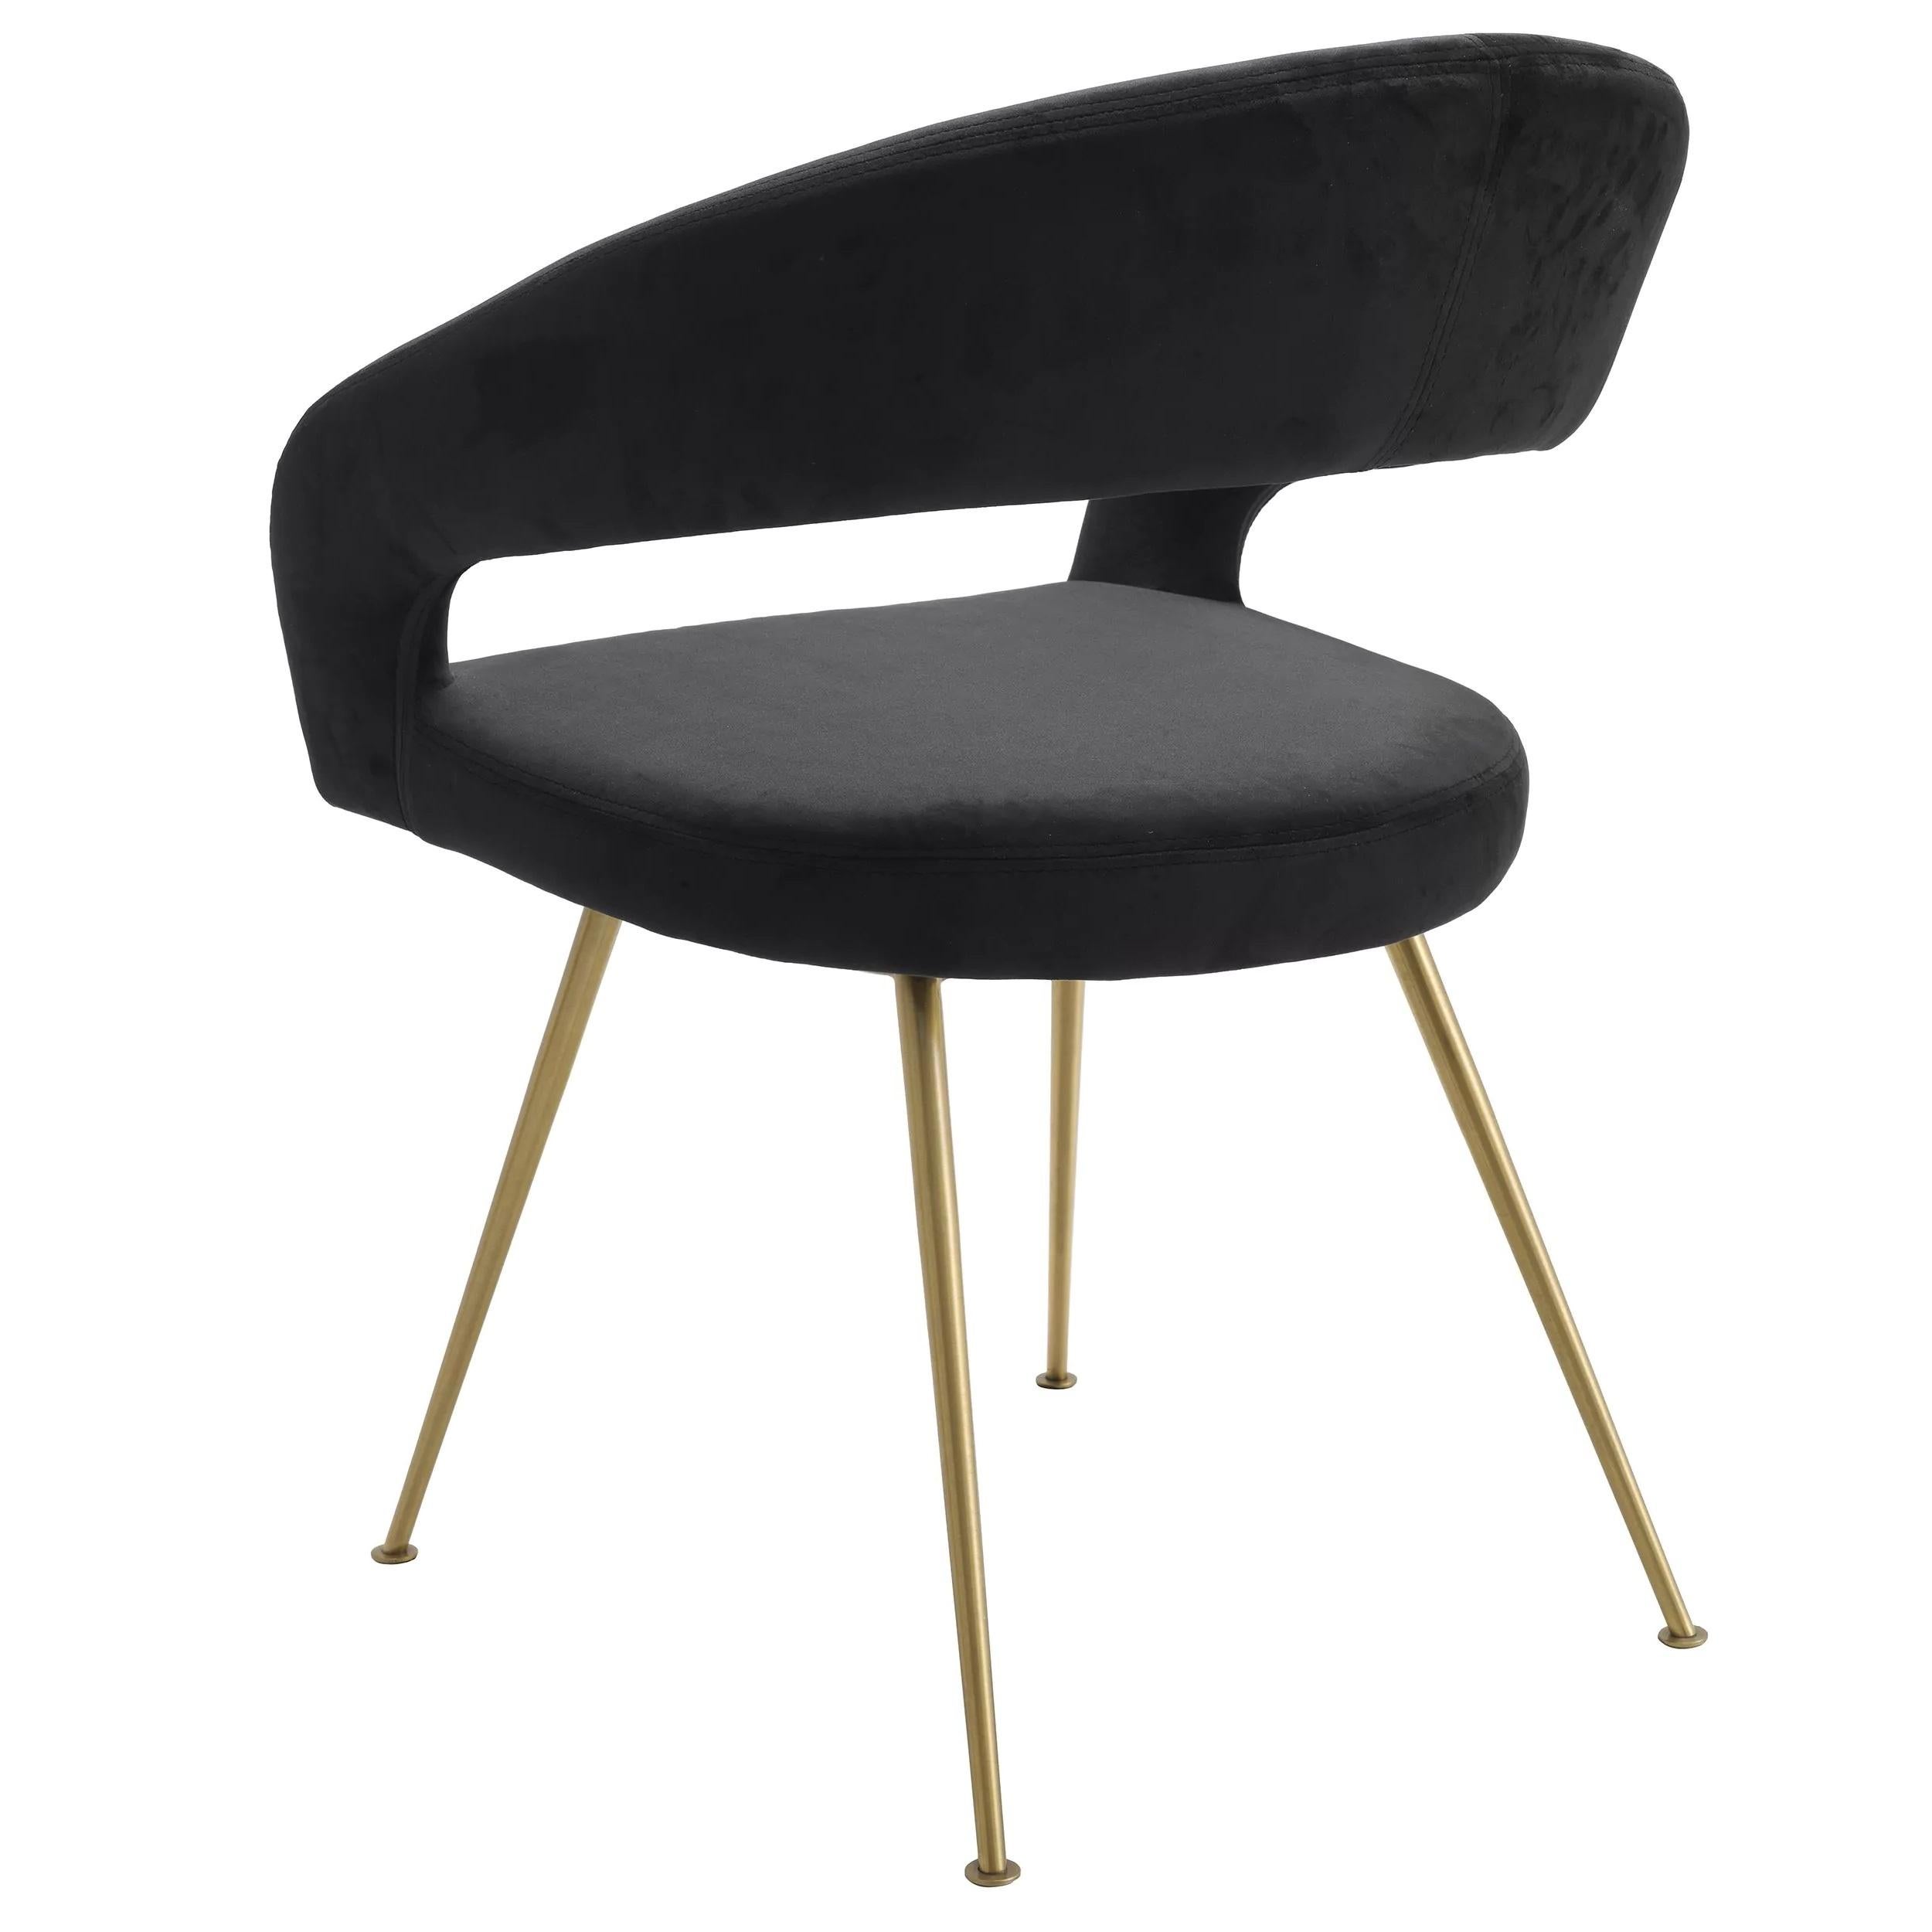 Contemporary 1950s Italian Design Style Black Velvet and Brass Finishes Dining Chair For Sale